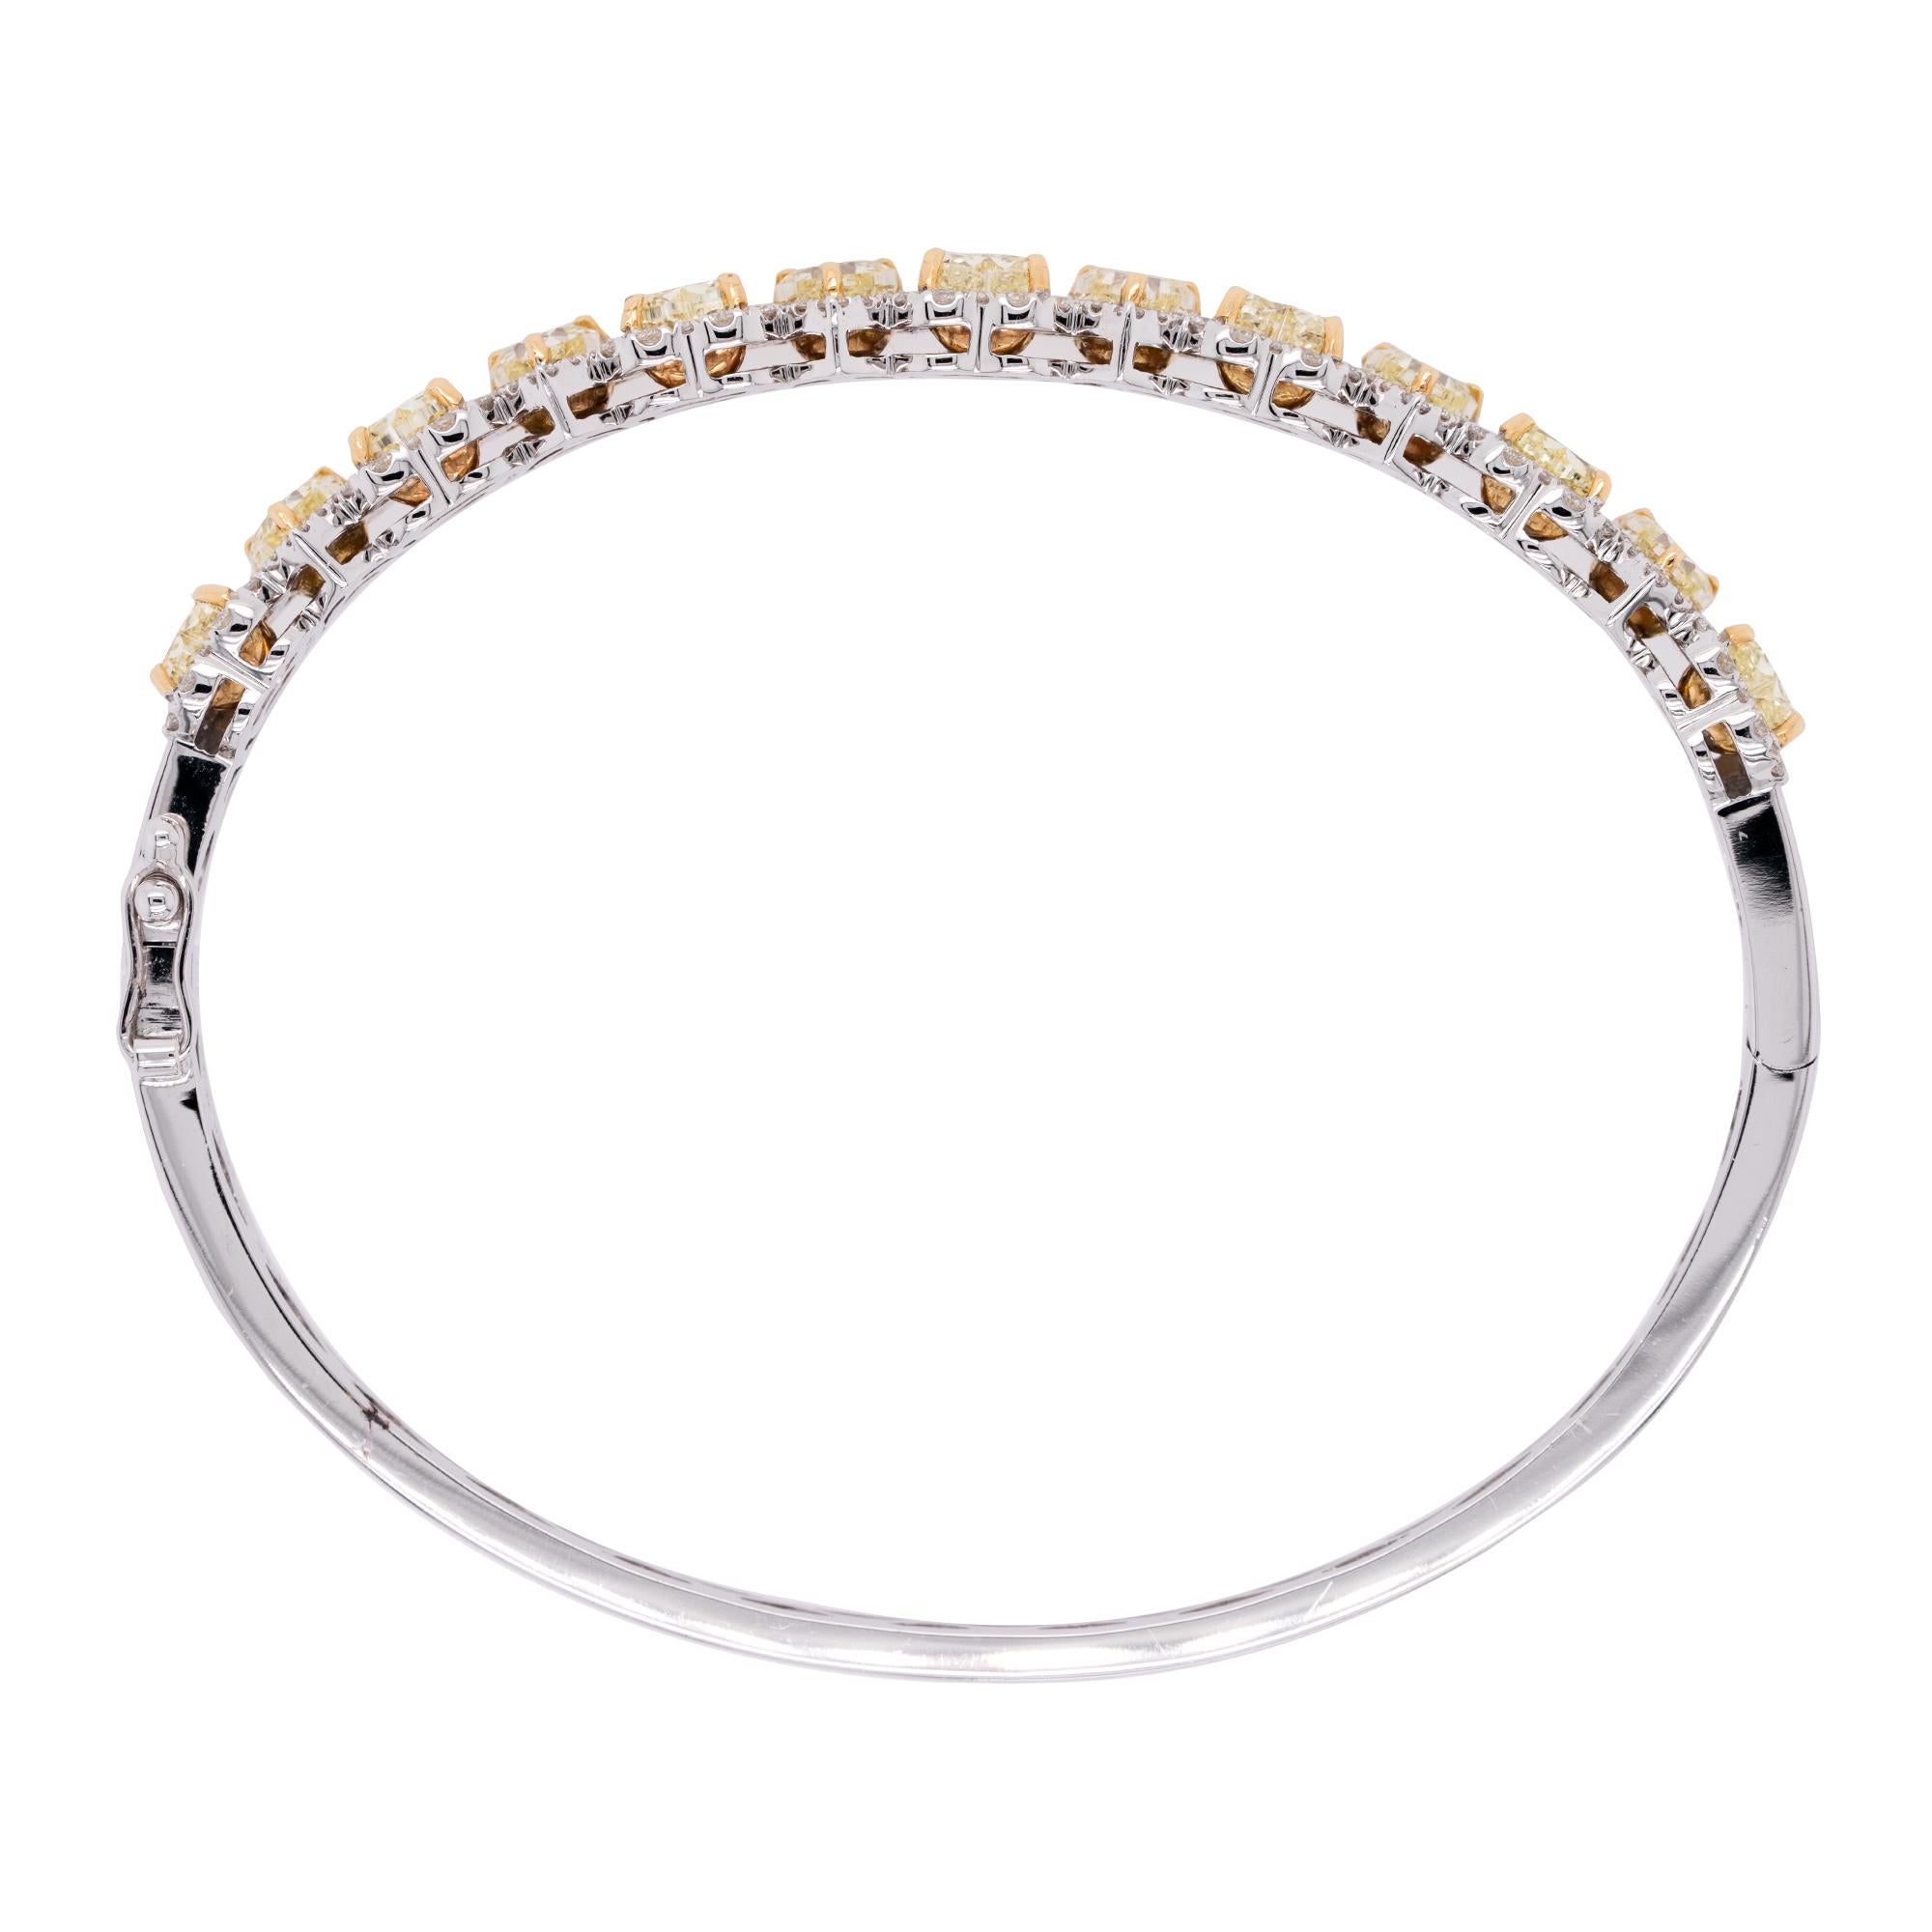 5.56 Carat Natural Fancy Heart & Round Cut Diamond Pave Bangle For Sale 1